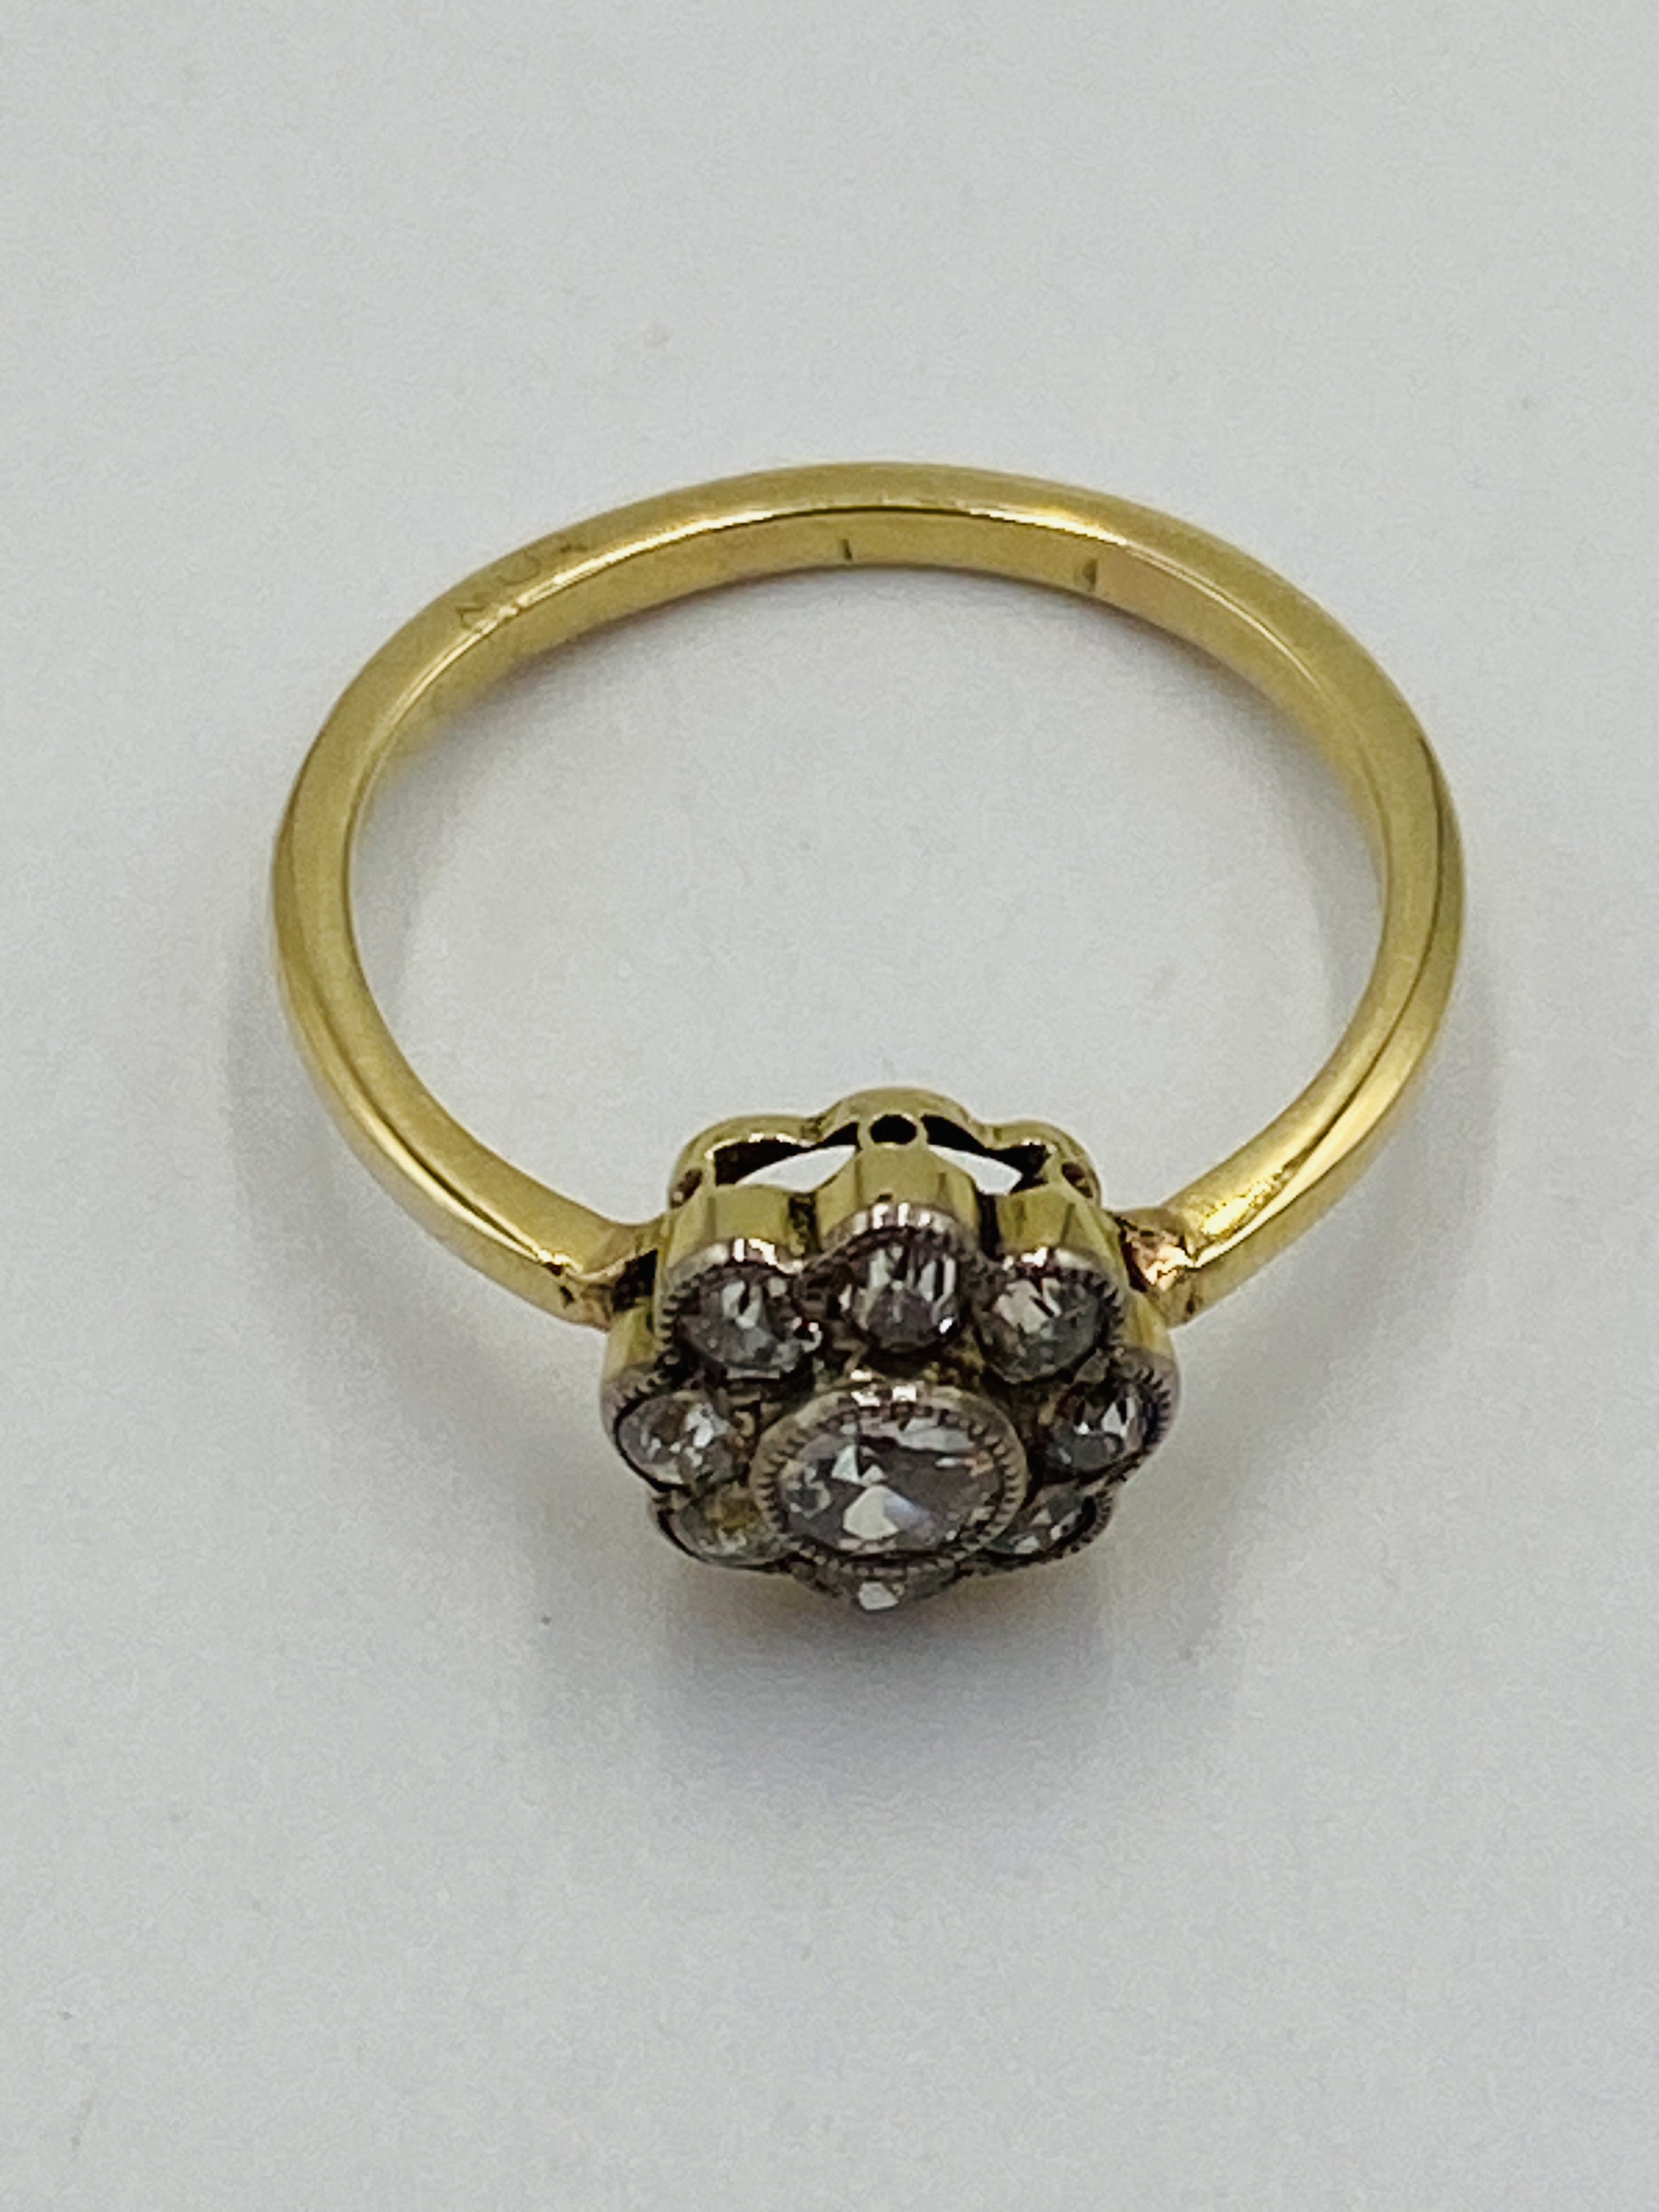 Gold and diamond 'daisy' ring - Image 4 of 6